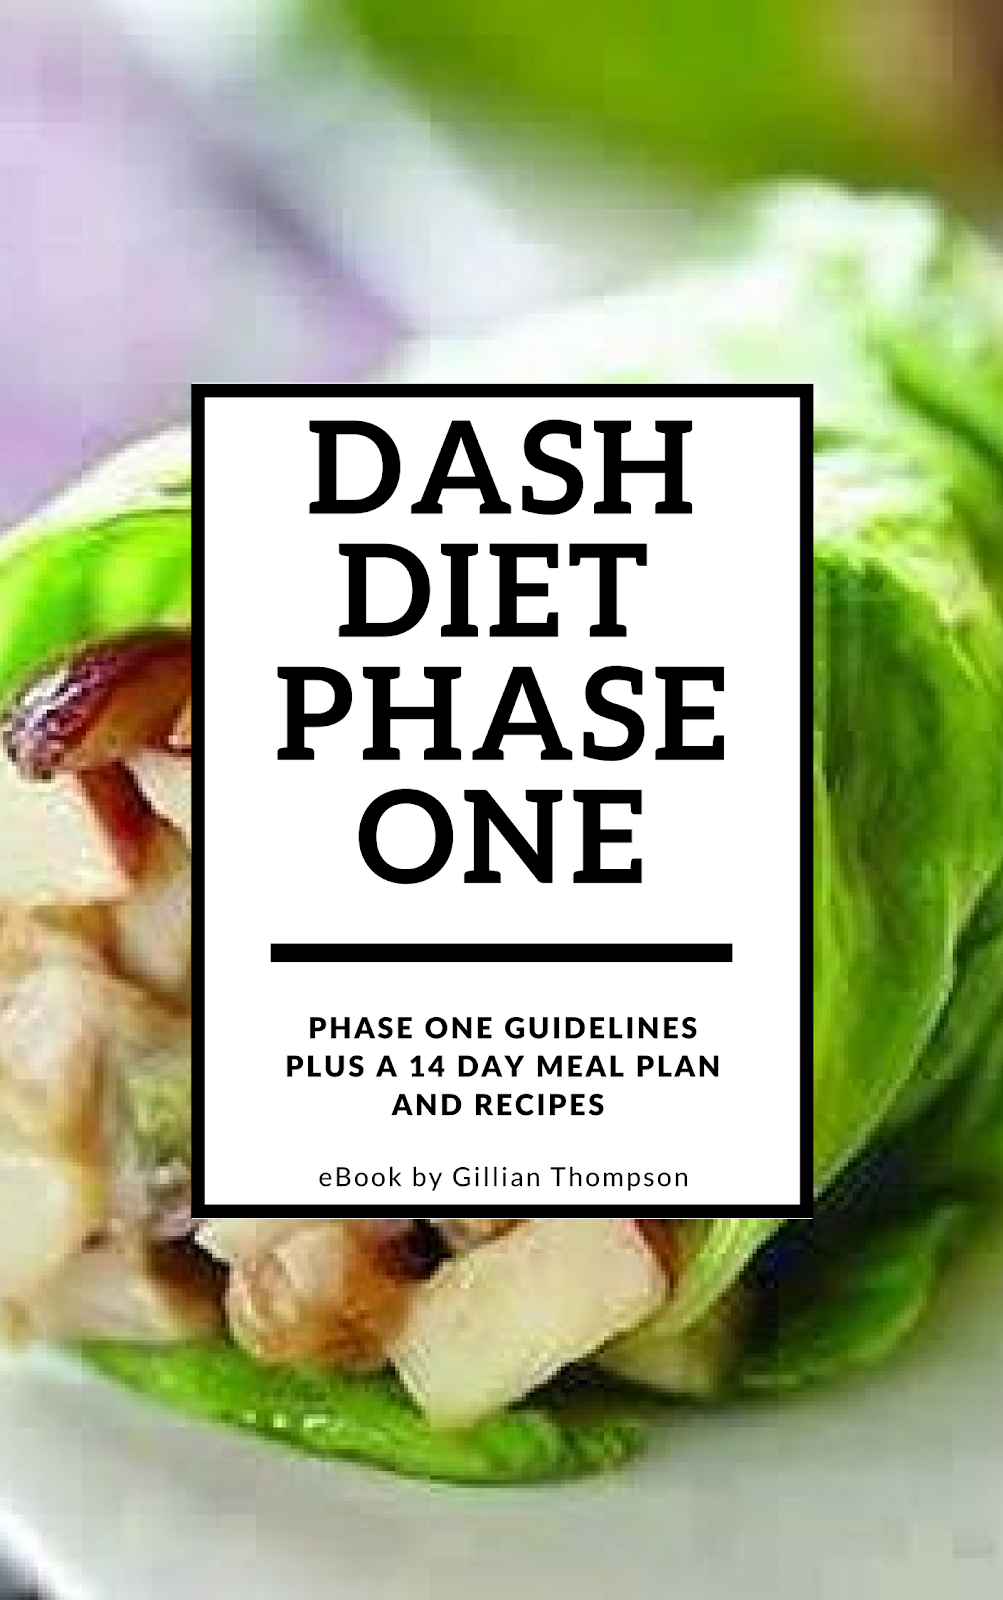 The Complete DASH Diet Phase One eBook